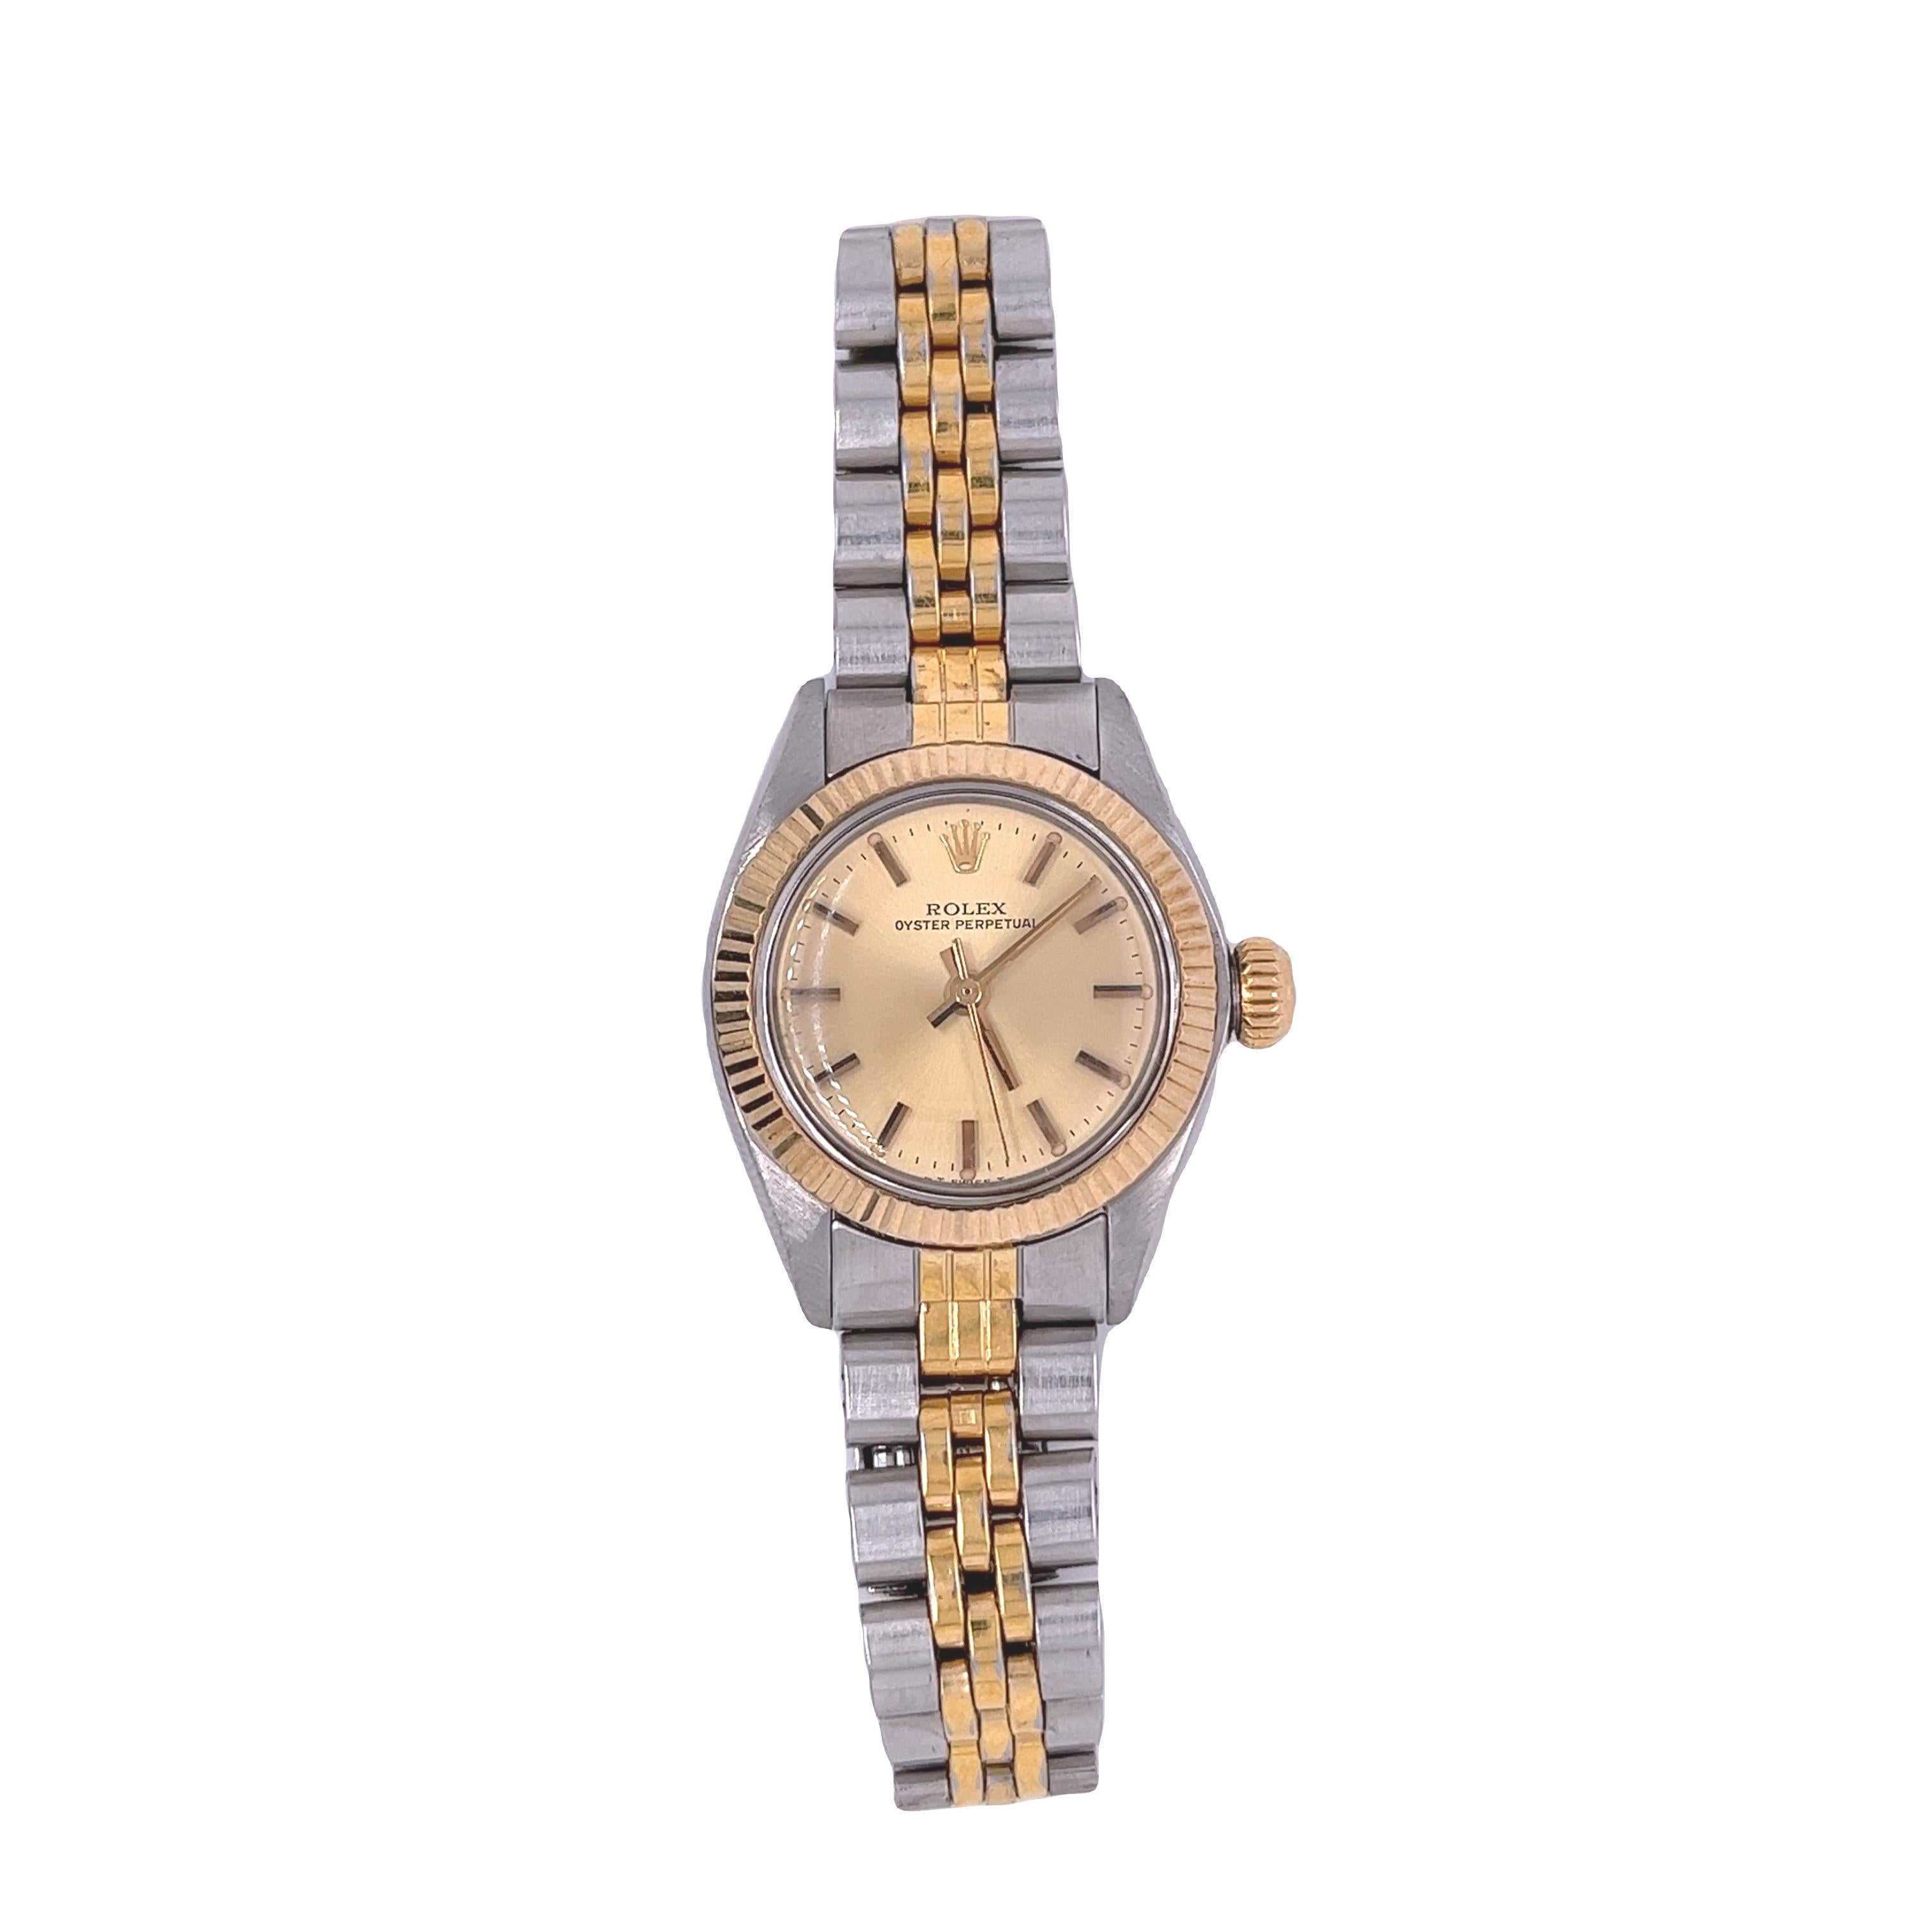 Women's Two Tone Ladies Rolex Dial Oyster Perpetual Watch with Tudor Strap